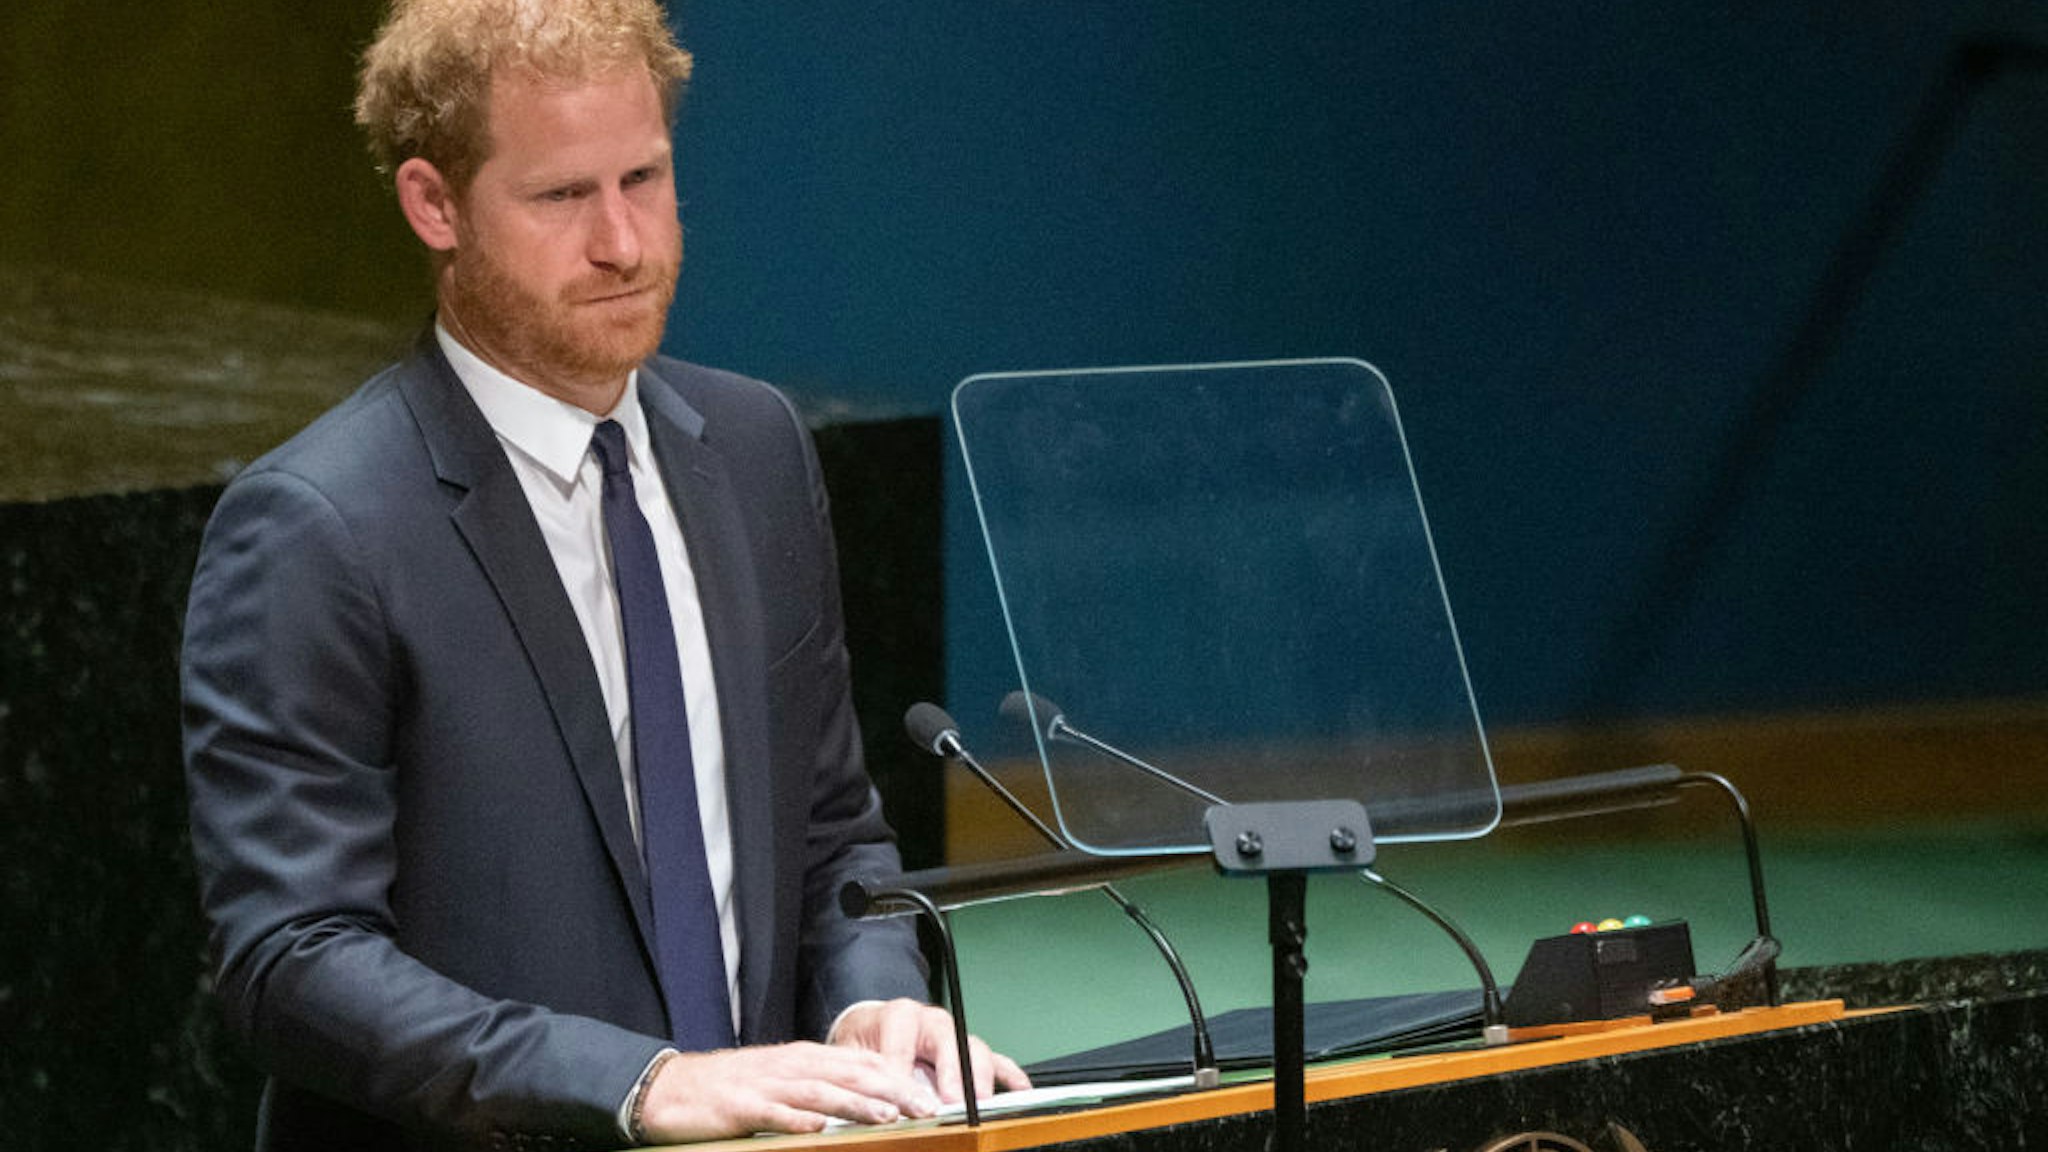 NEW YORK, NY - JULY 18: Prince Harry, Duke of Sussex, speaks at the United Nations General Assembly on Nelson Mandela International Day at U.N. headquarters on July 18, 2022 in New York City. Nelson Mandela International Day was officially declared by the United Nations in November of 2009 and was first celebrated on July 18, 2010. The 2020 U.N. Nelson Mandela Prize is being awarded to Mrs. Marianna Vardinogiannis of Greece and Dr. Morissanda Kouyaté of Guinea. (Photo by David Dee Delgado/Getty Images)